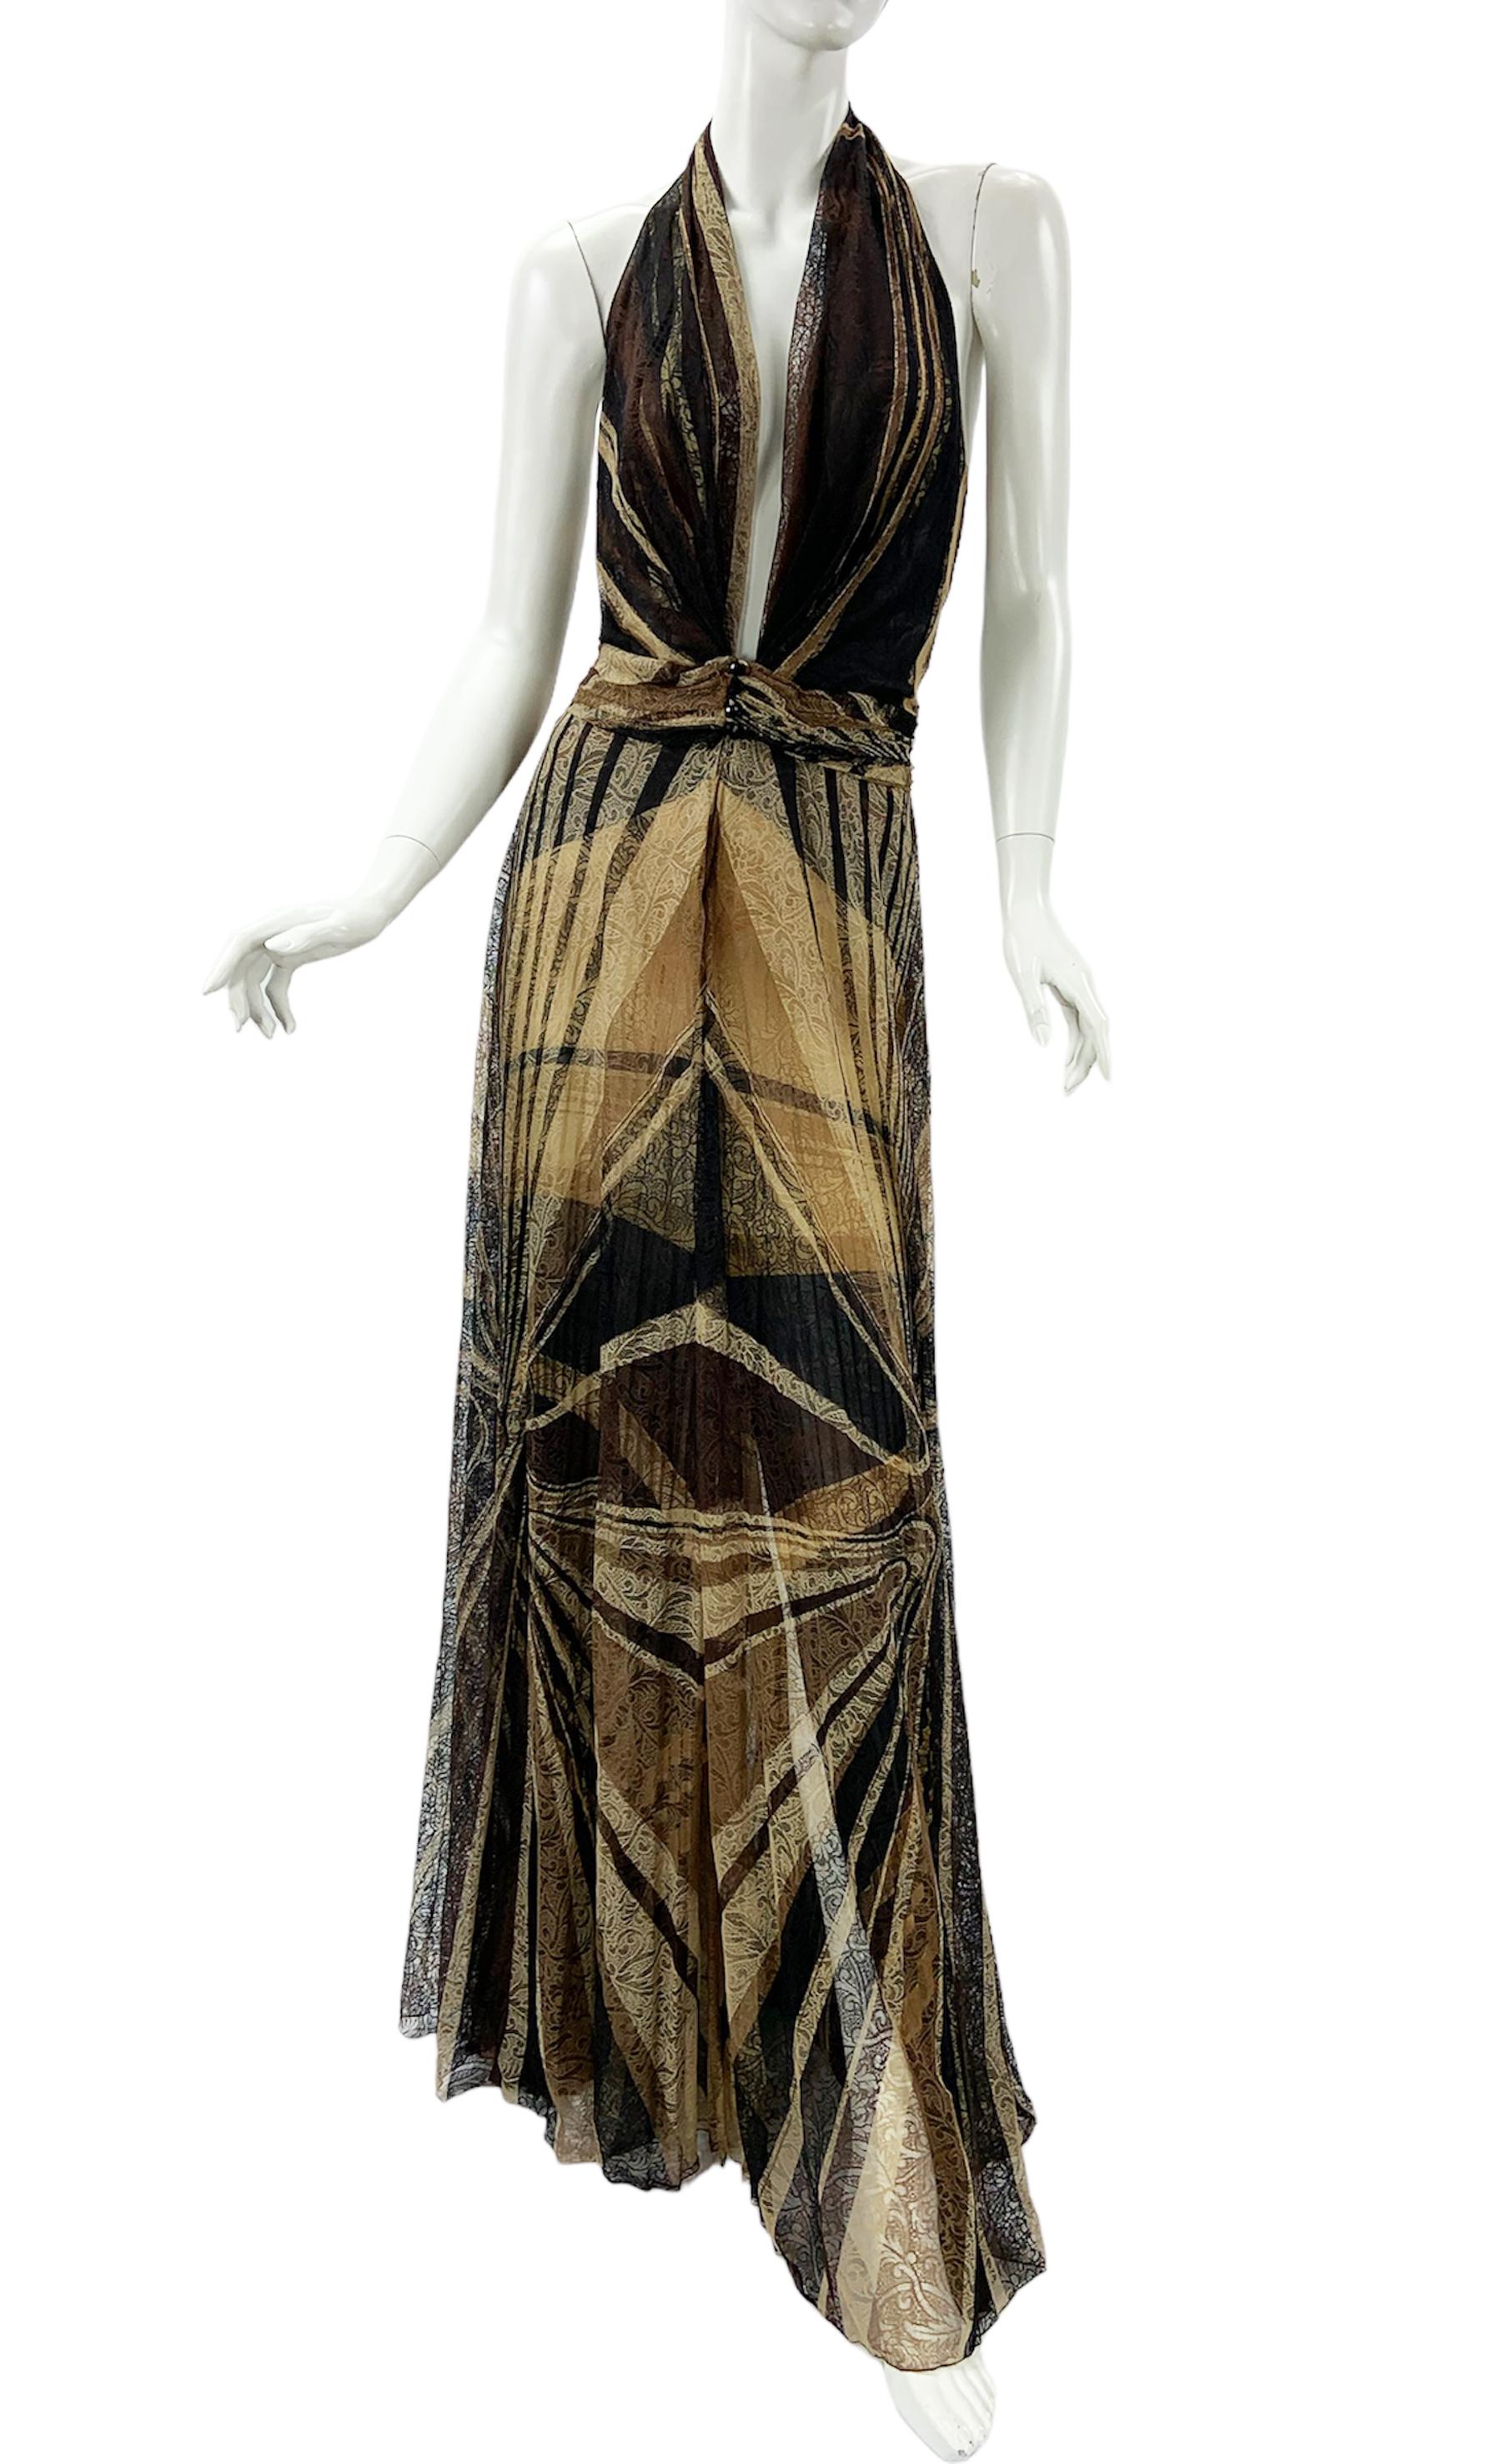 Women's Vintage Gianni Versace Couture FW 2000 AD Campaign Lace Plunging Dress Gown 40 For Sale